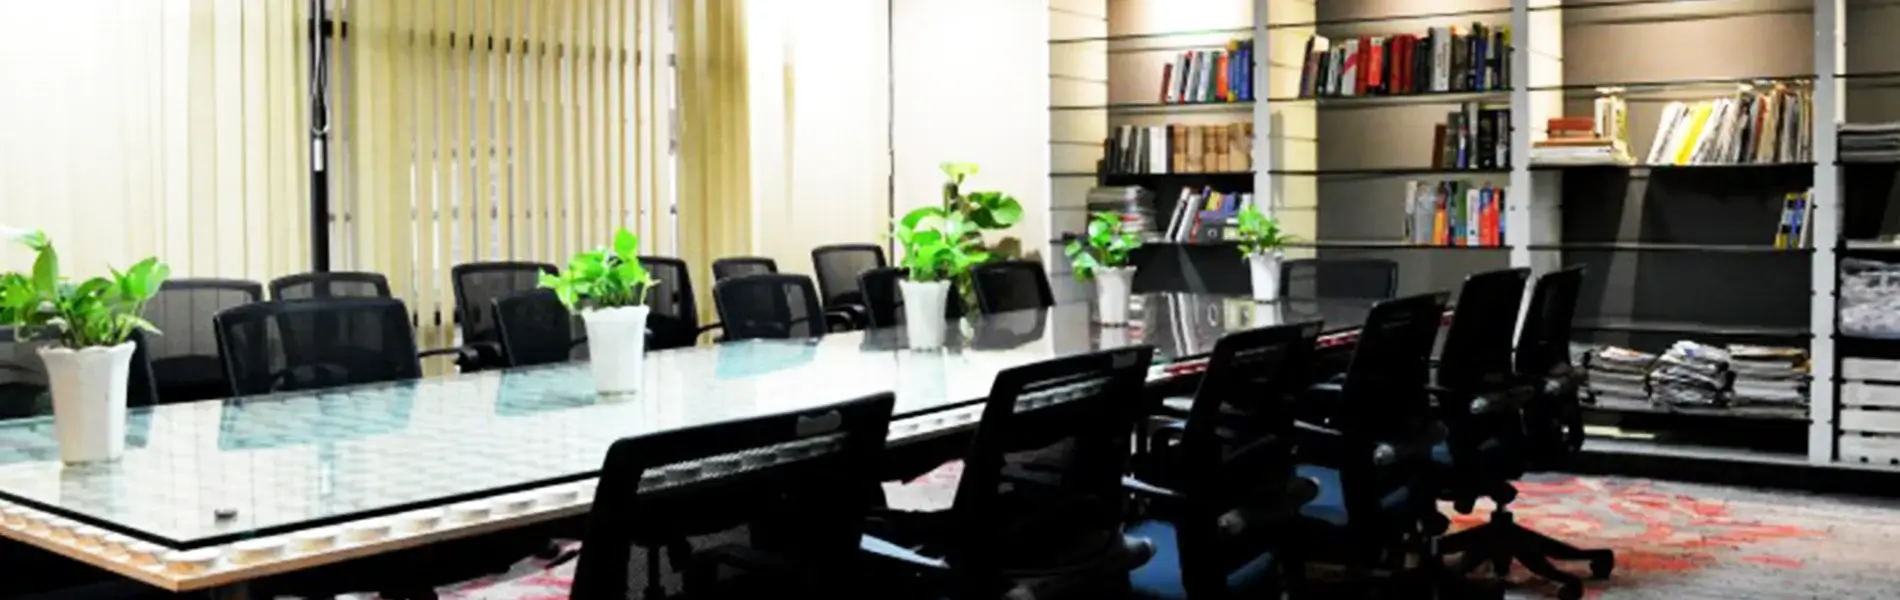 Common Mistakes to Avoid When Renting a Private Meeting Room